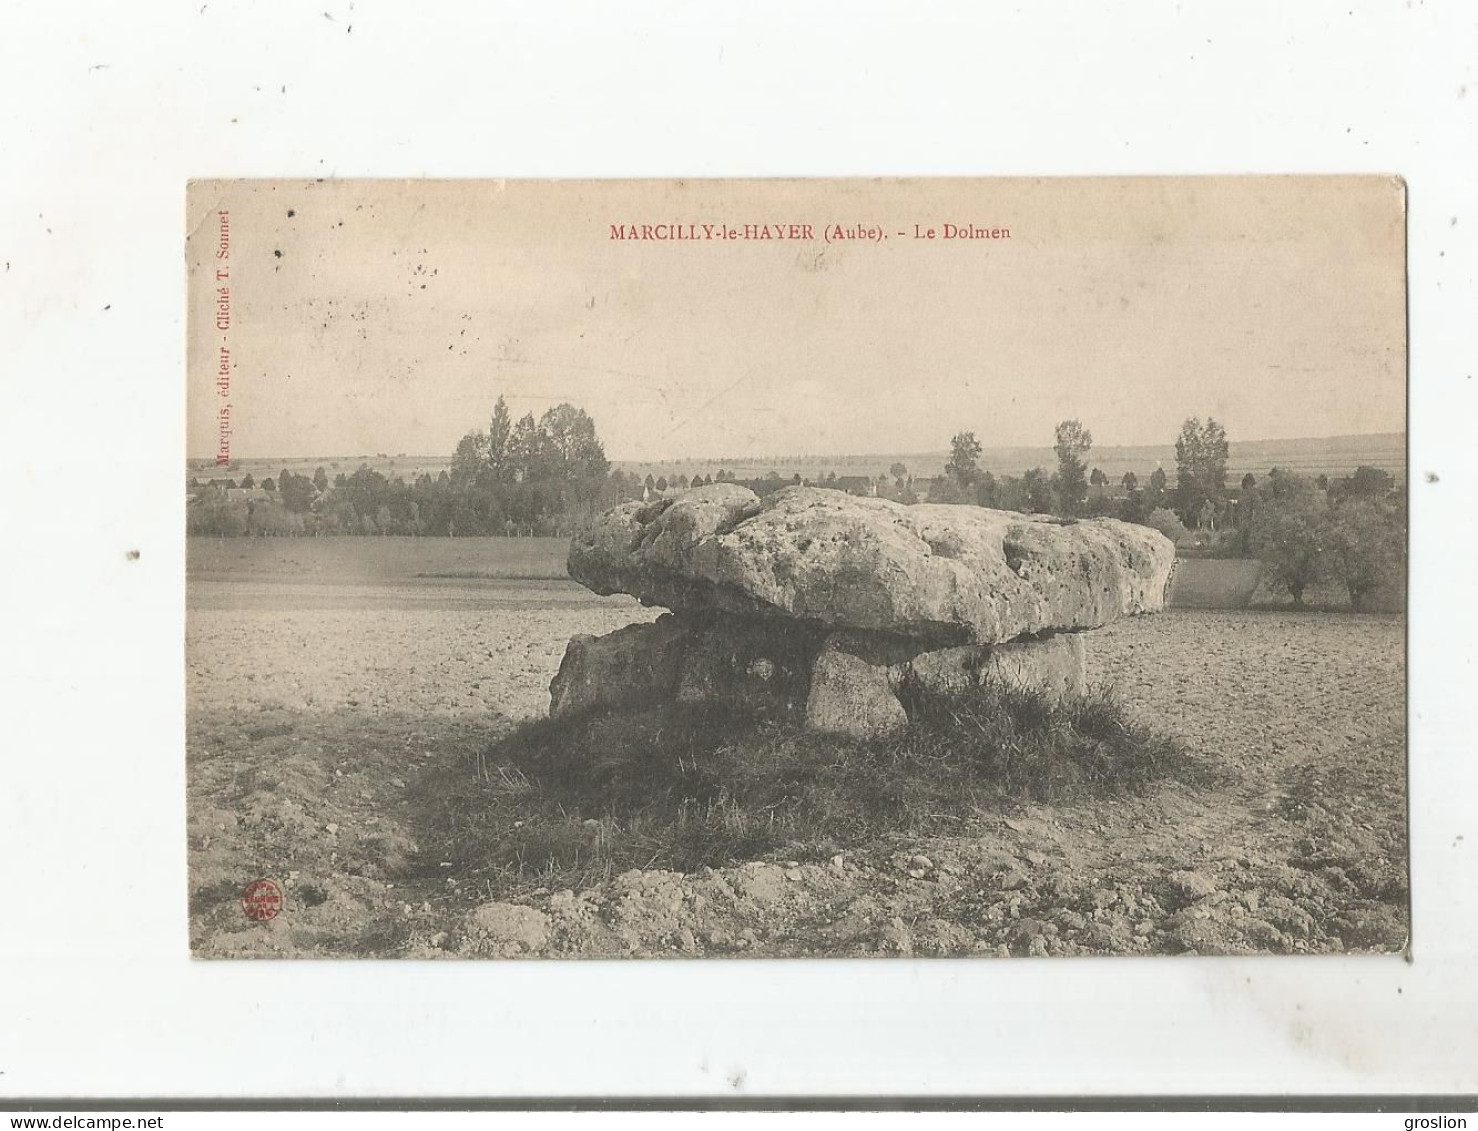 MARCILLY LE HAYER (AUBE) LE DOLMEN 1907 - Marcilly